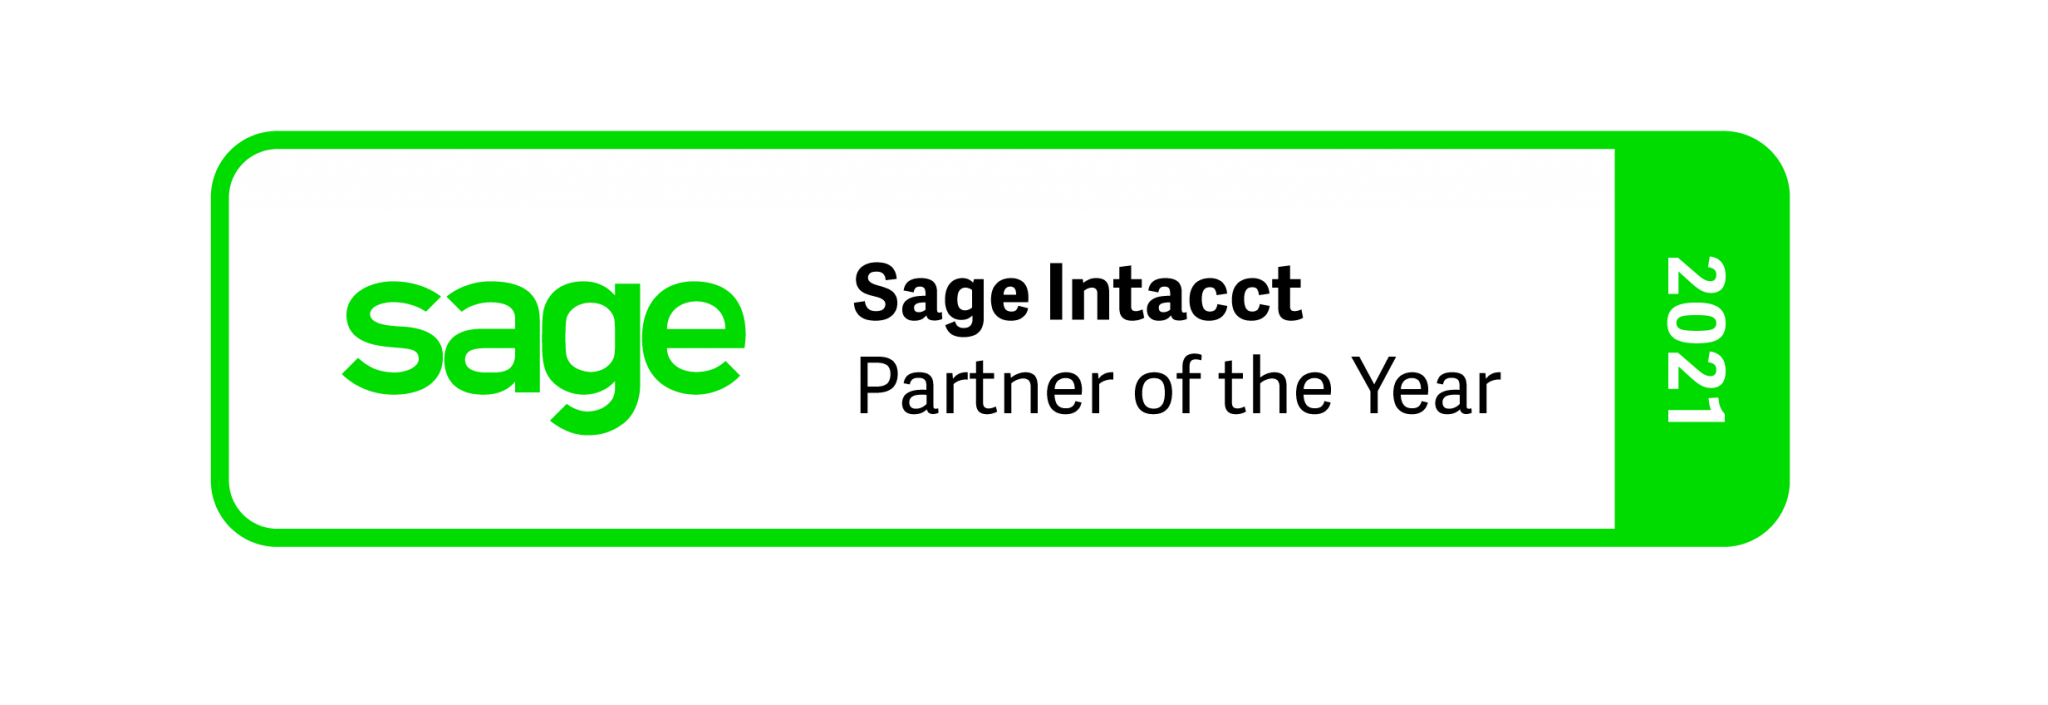 Percipient Wins Sage Intacct Partner of the Year News